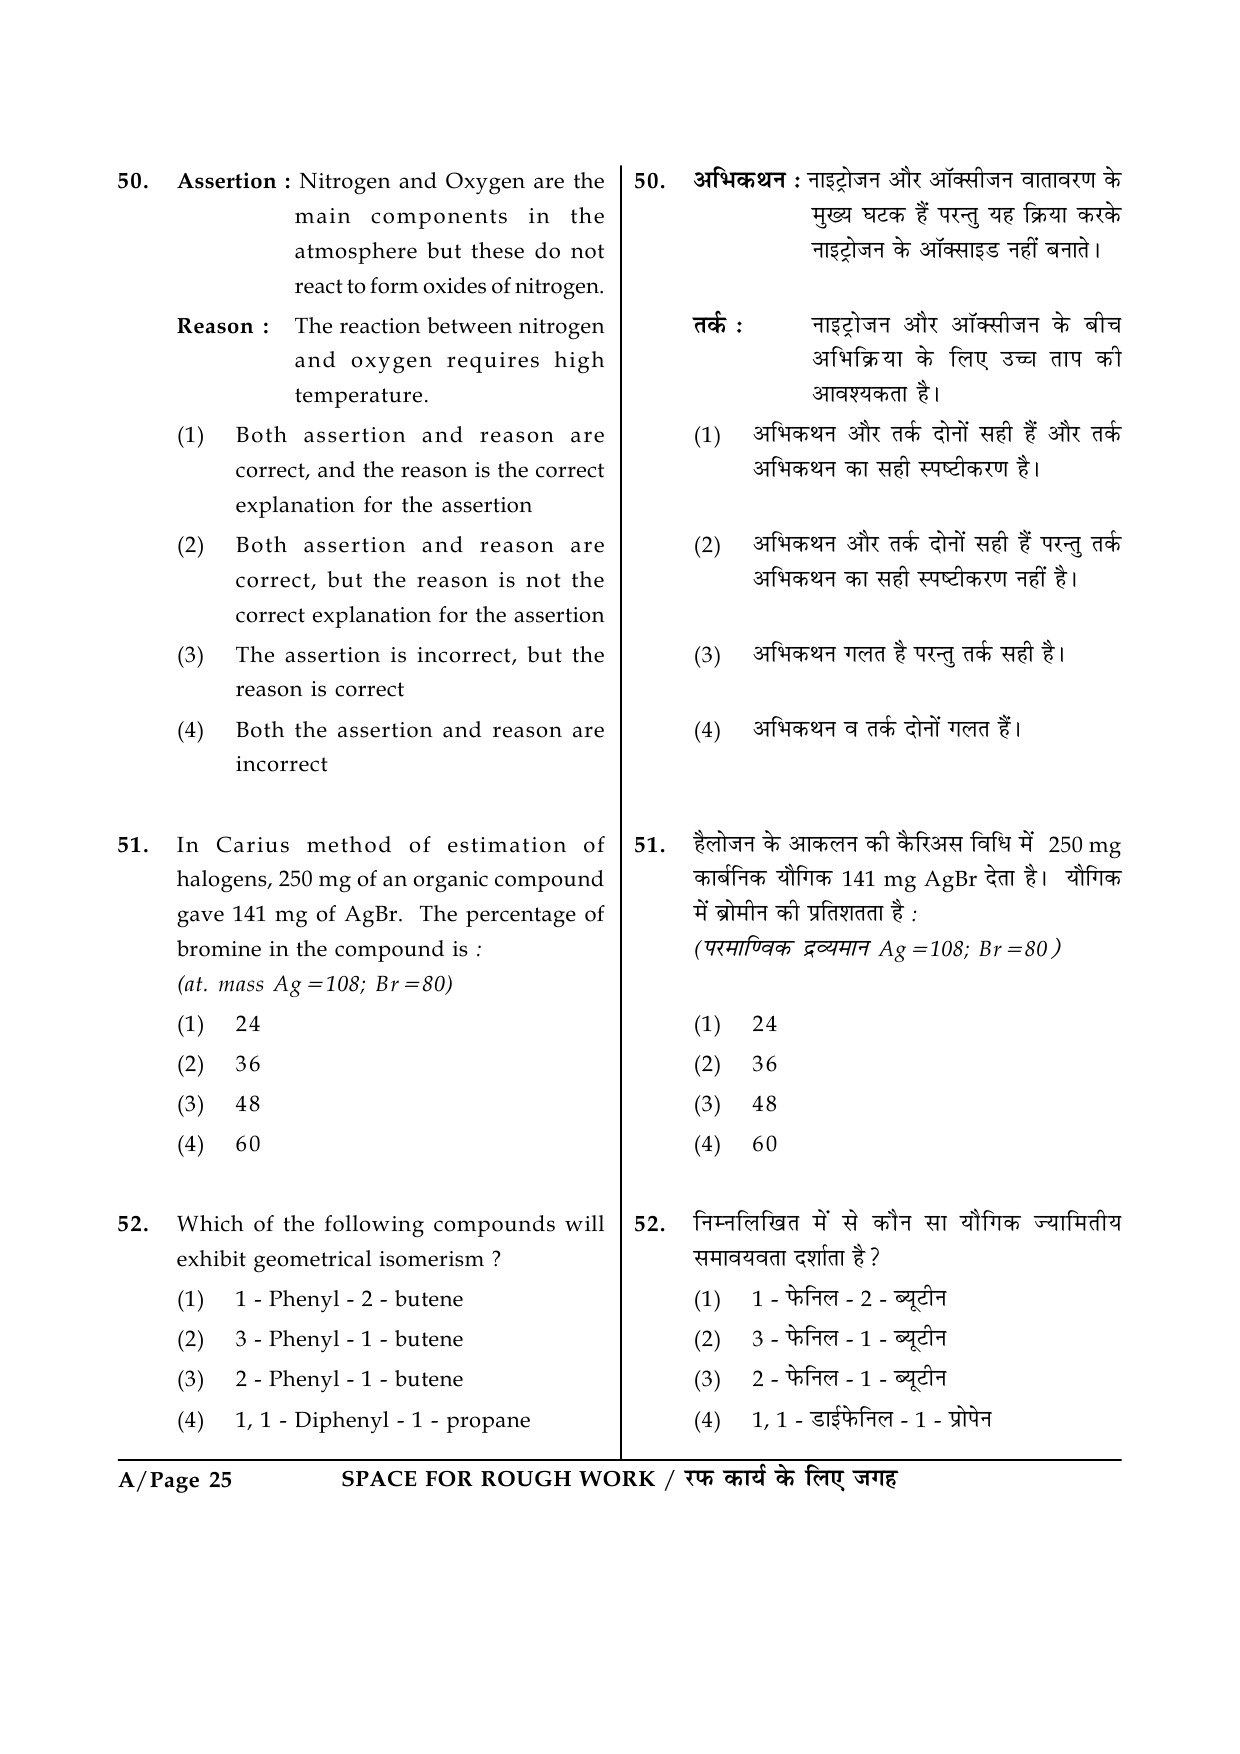 JEE Main Exam Question Paper 2015 Booklet A 25